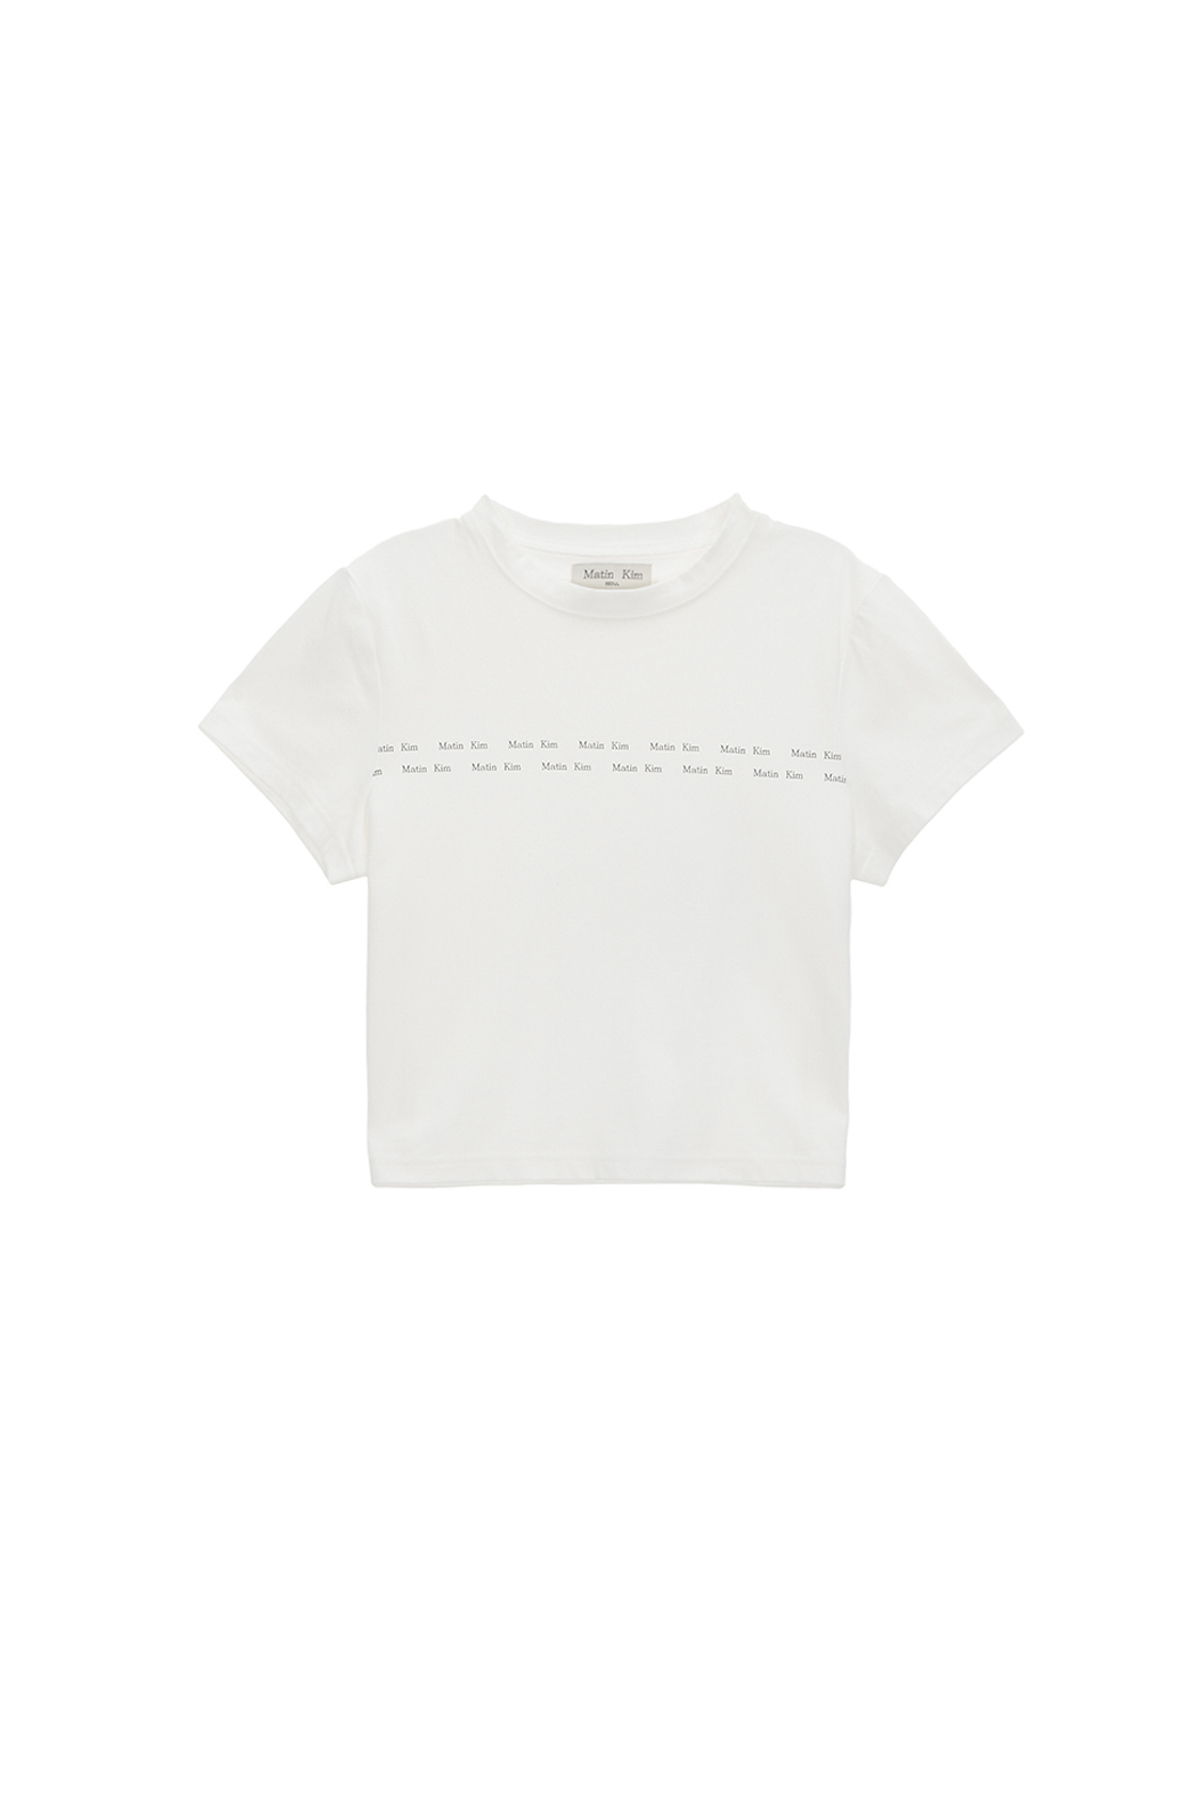 DOUBLE LINE LOGO CROP TOP IN WHITE